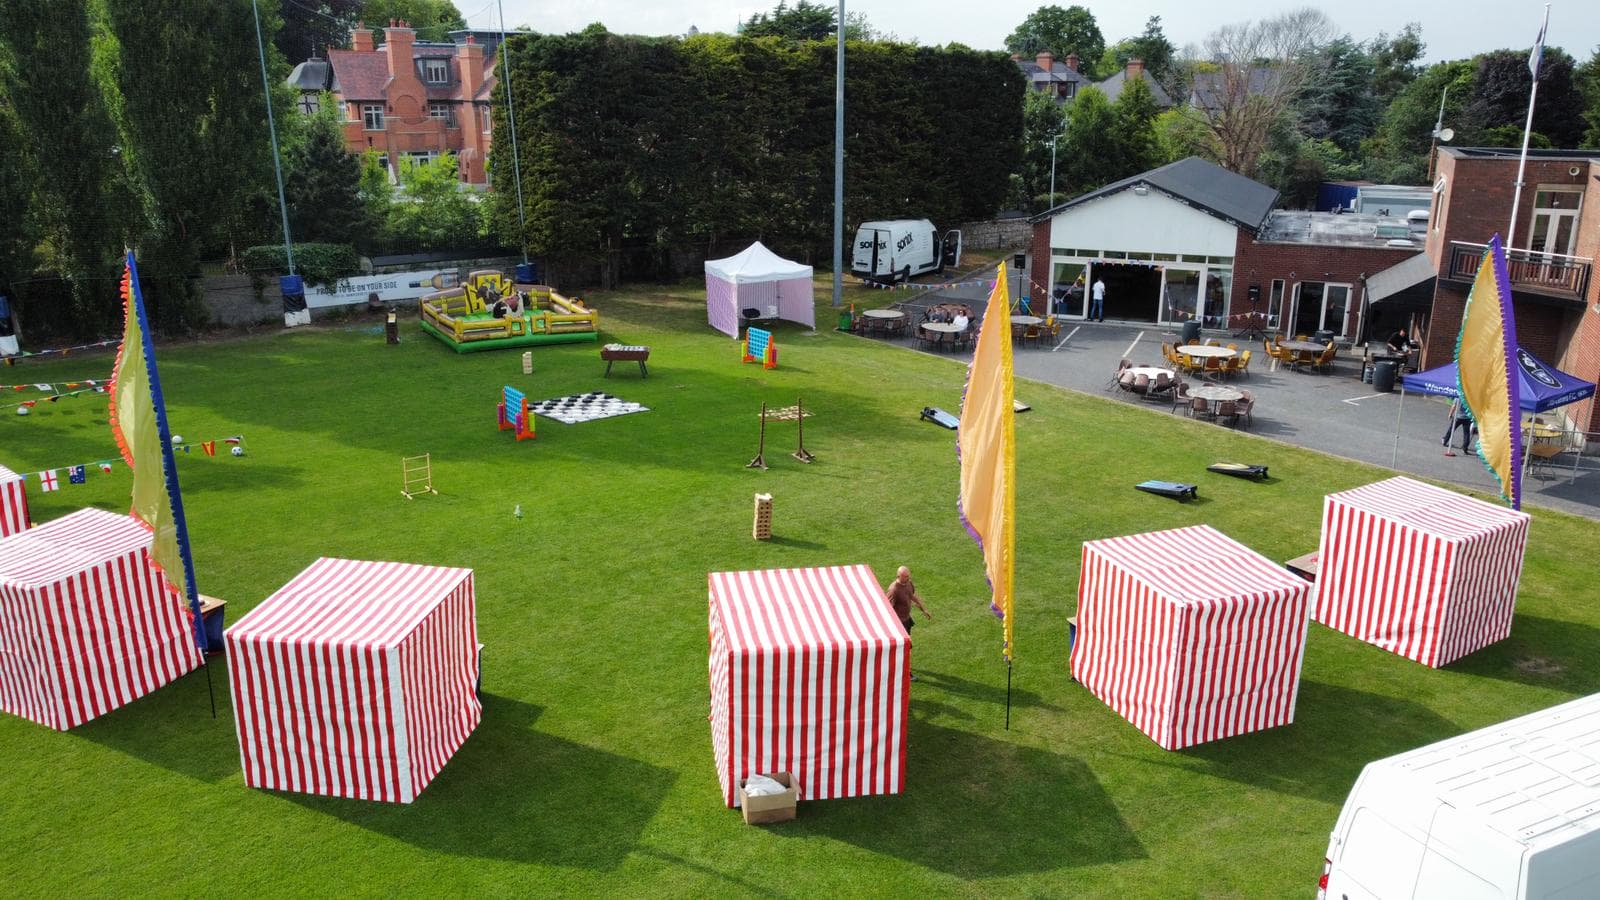 An assortment of games stalls are arranged on a grassy field outside an Irish hotel for a company summer party